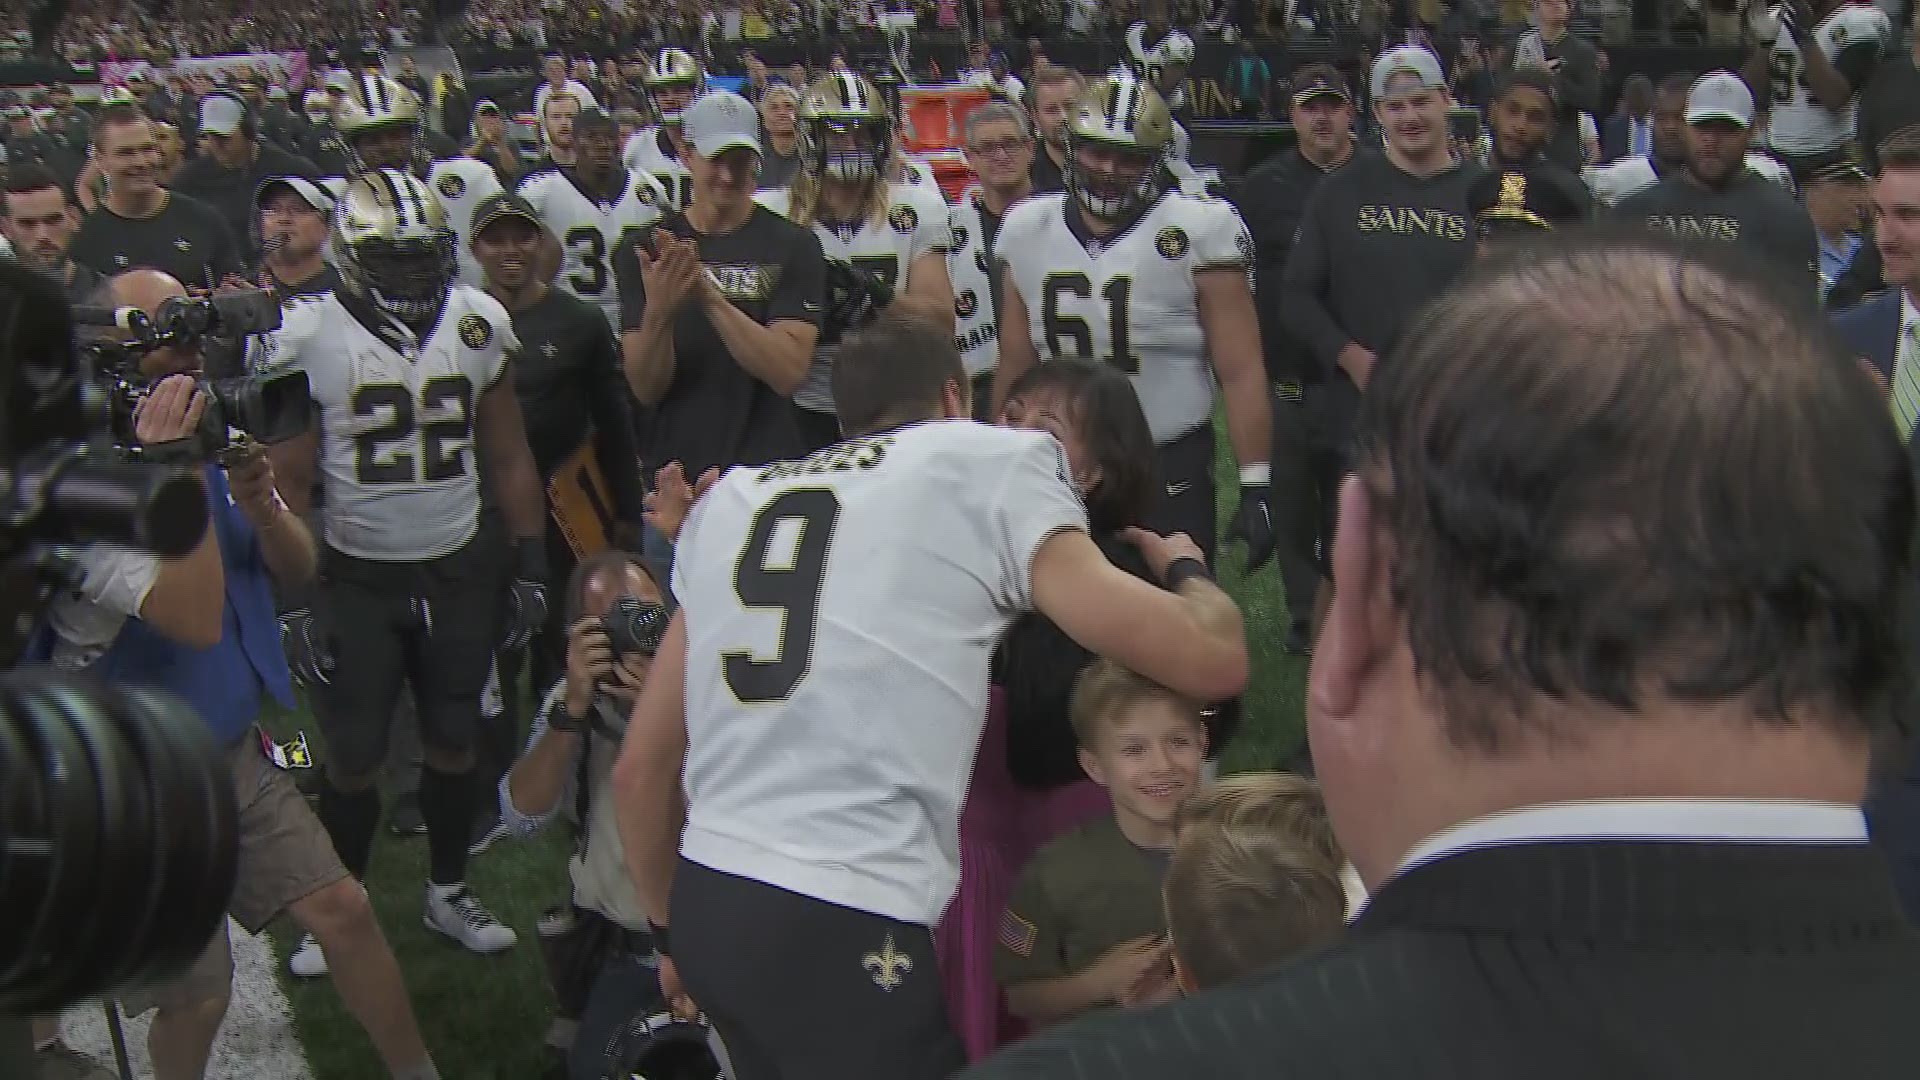 Brees showed vulnerability through tears, gratefulness to many others and the importance of being a team player.